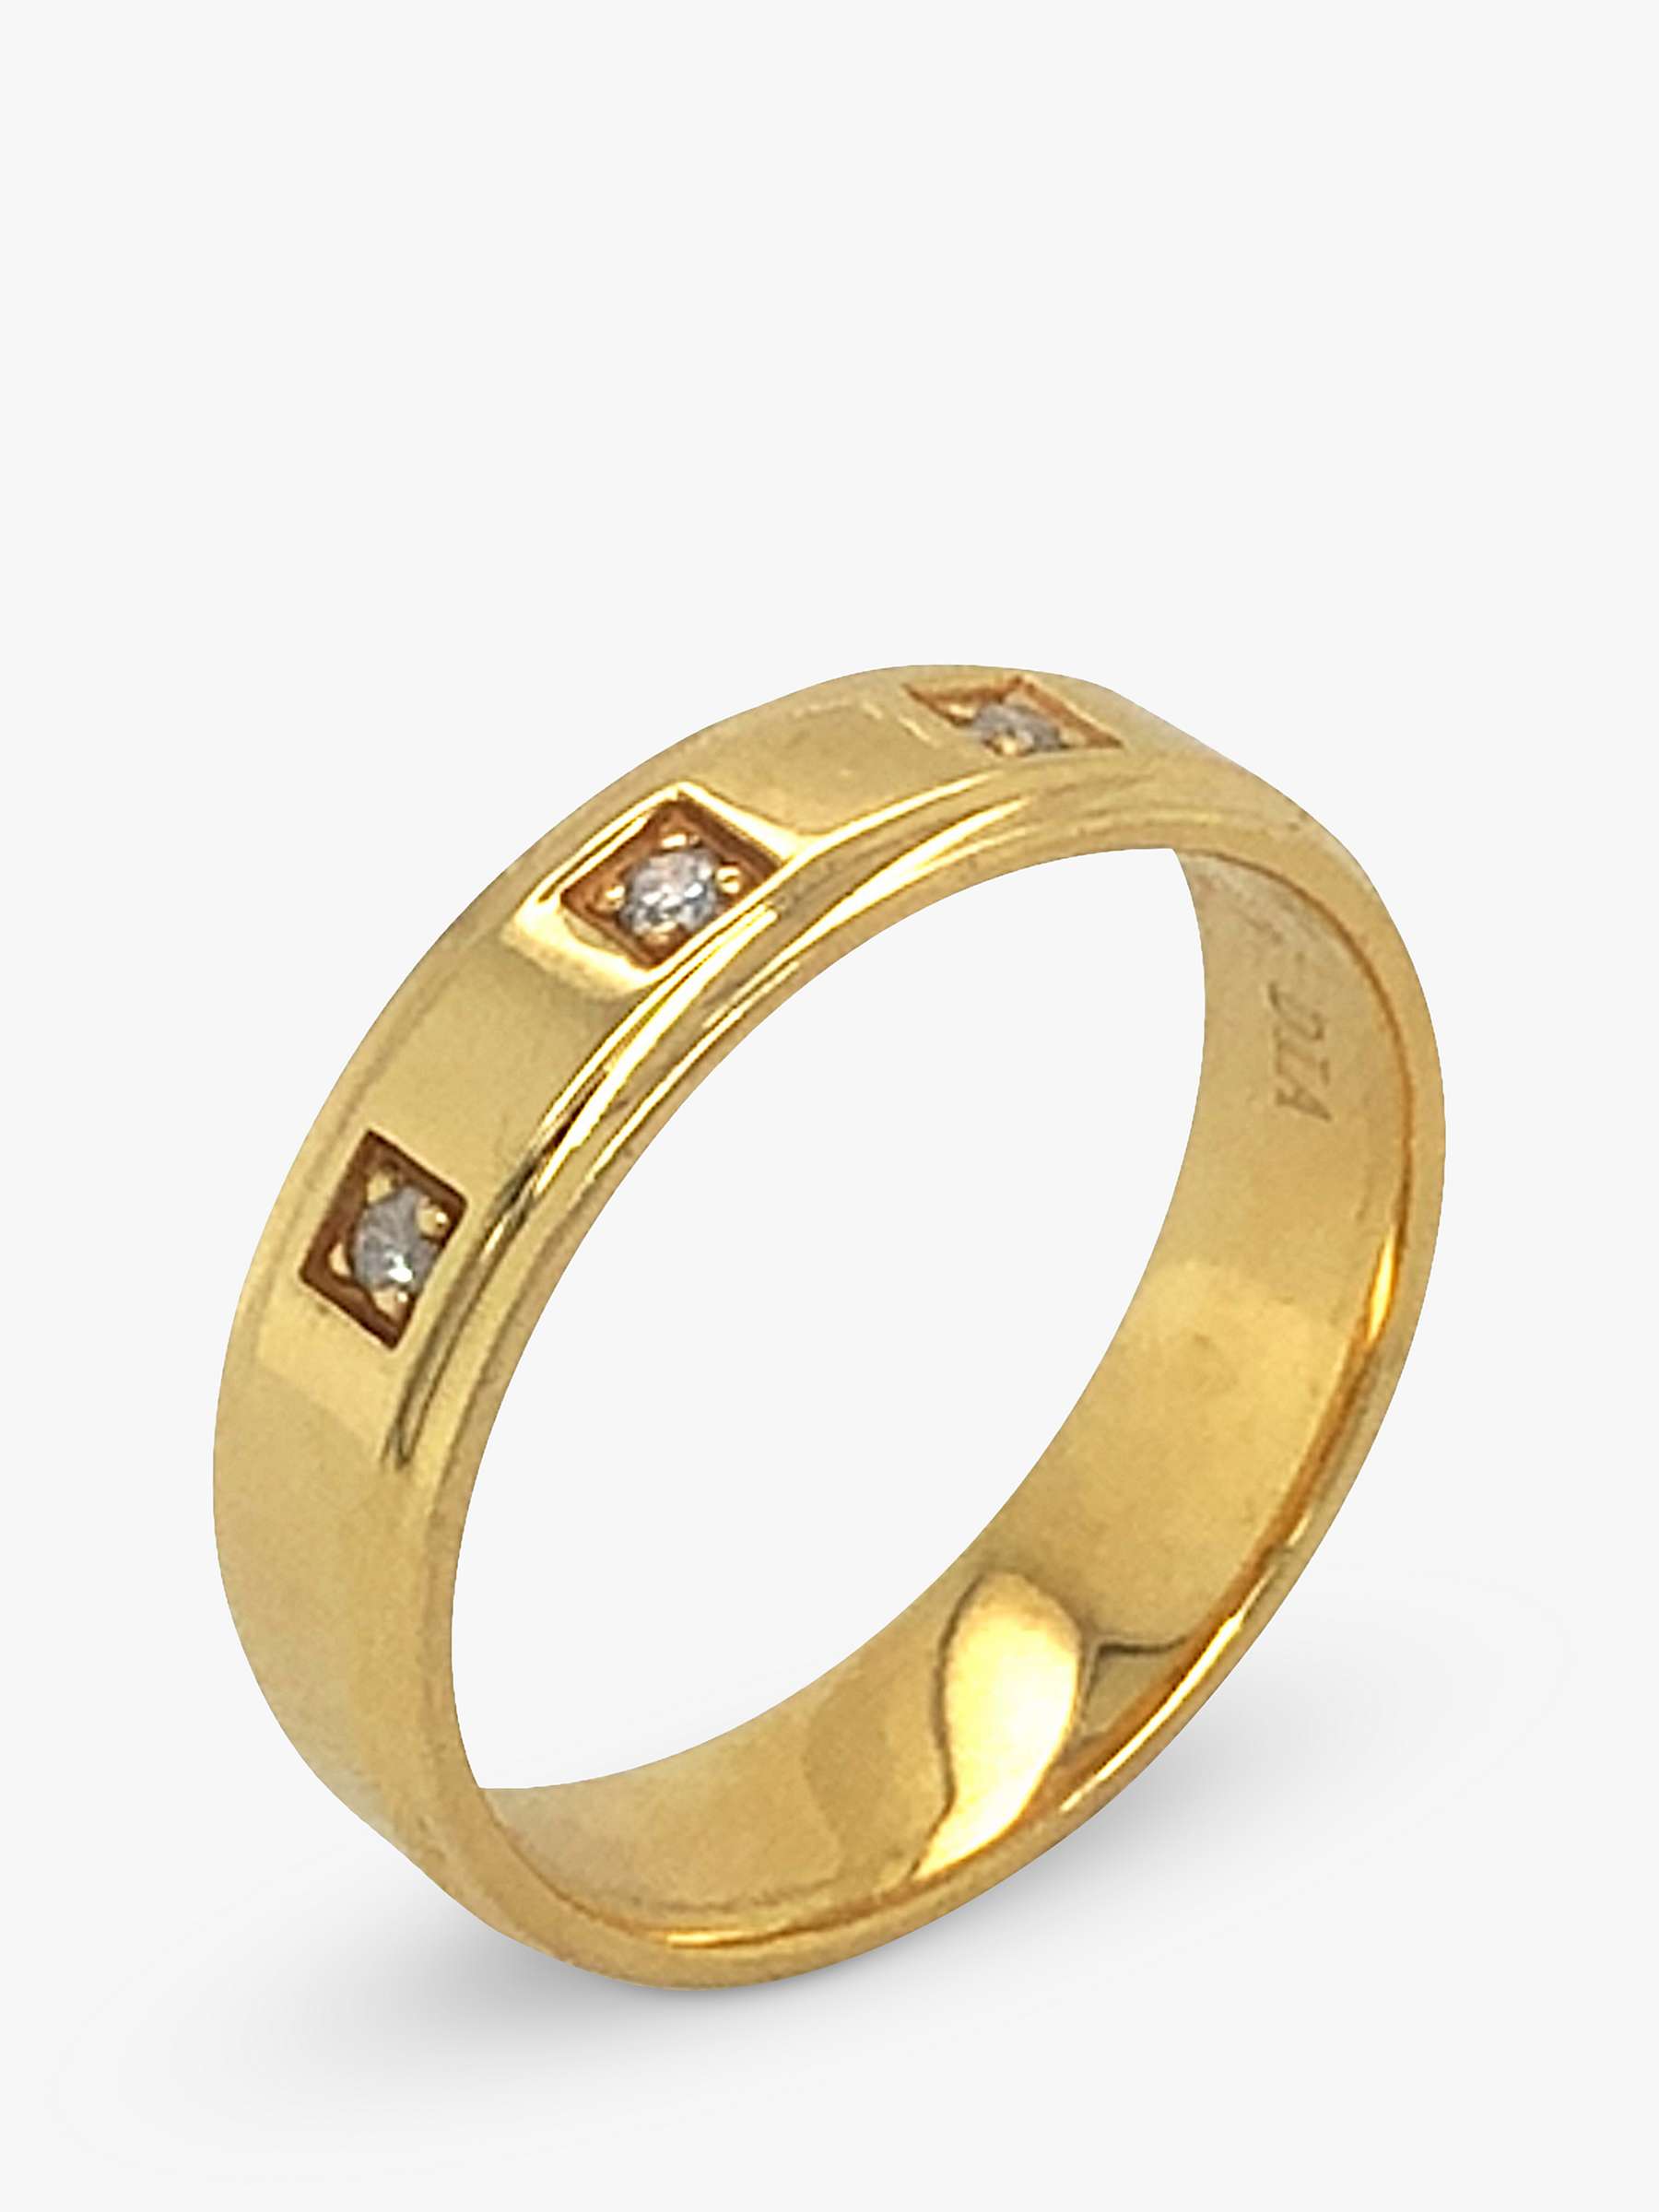 Buy Vintage Fine Jewellery Second Hand 18ct Yellow Gold 3 Stone Diamond Ring Online at johnlewis.com